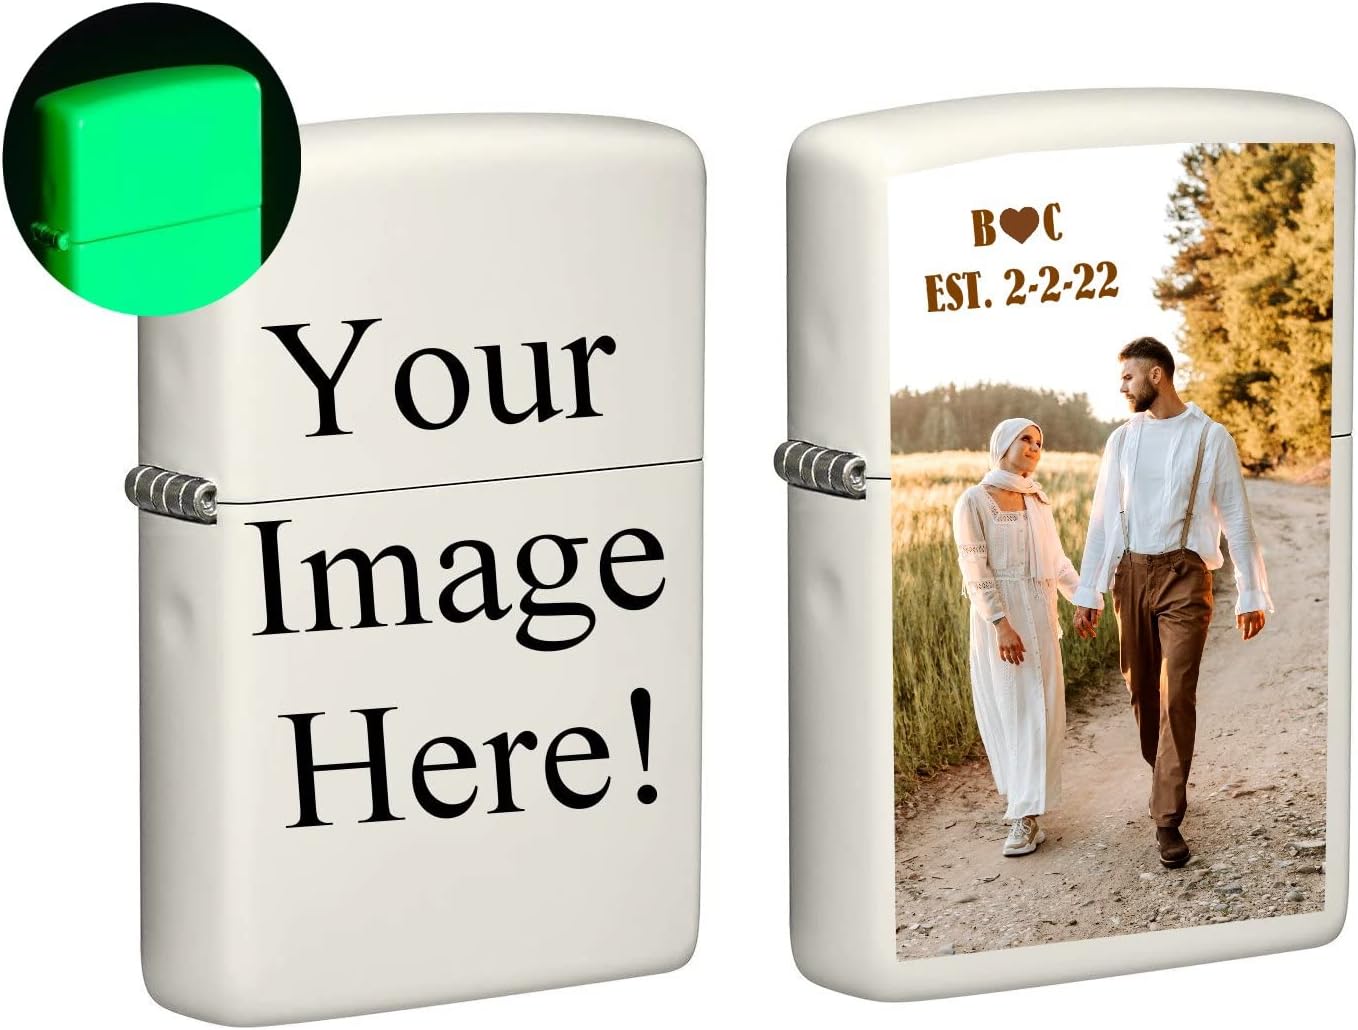 Zippo Lighter - Customized Glow-in-The-Dark Personalized Engraving with Your Photo, Image, Logo, Artwork, or Message - Genuine Windproof Collectible Zippo Lighter